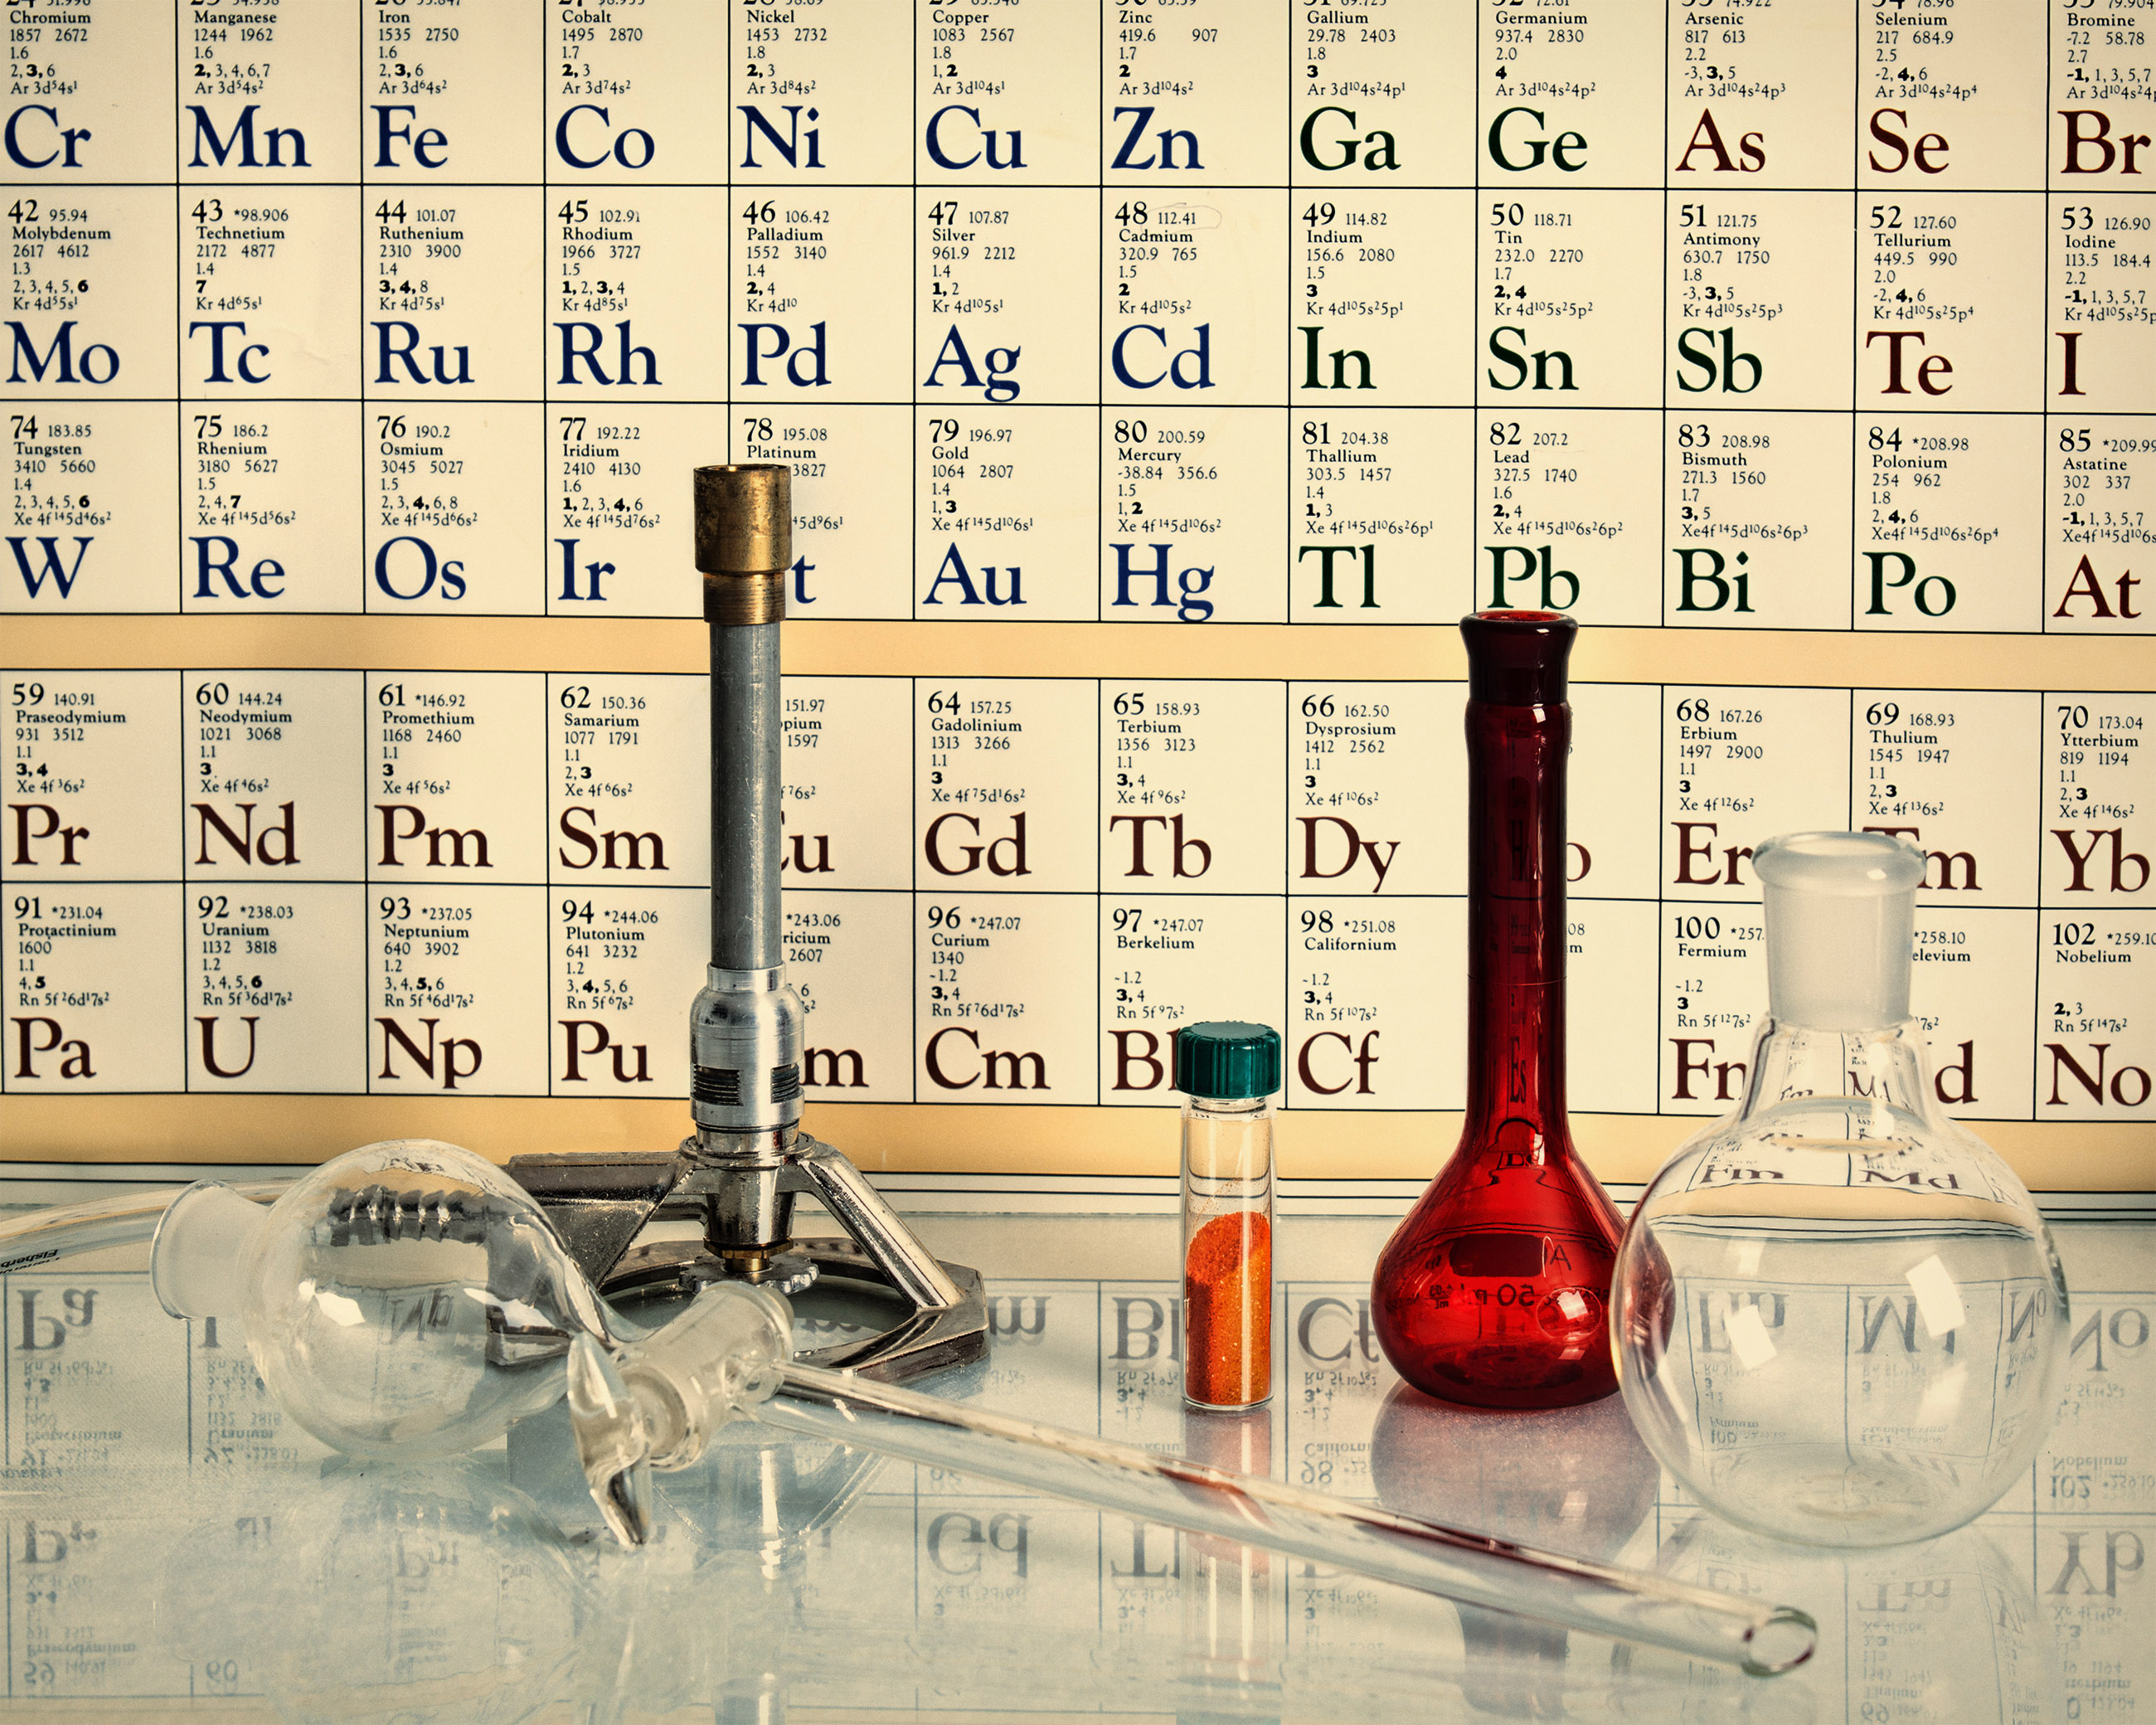 Retro style chemical science photo